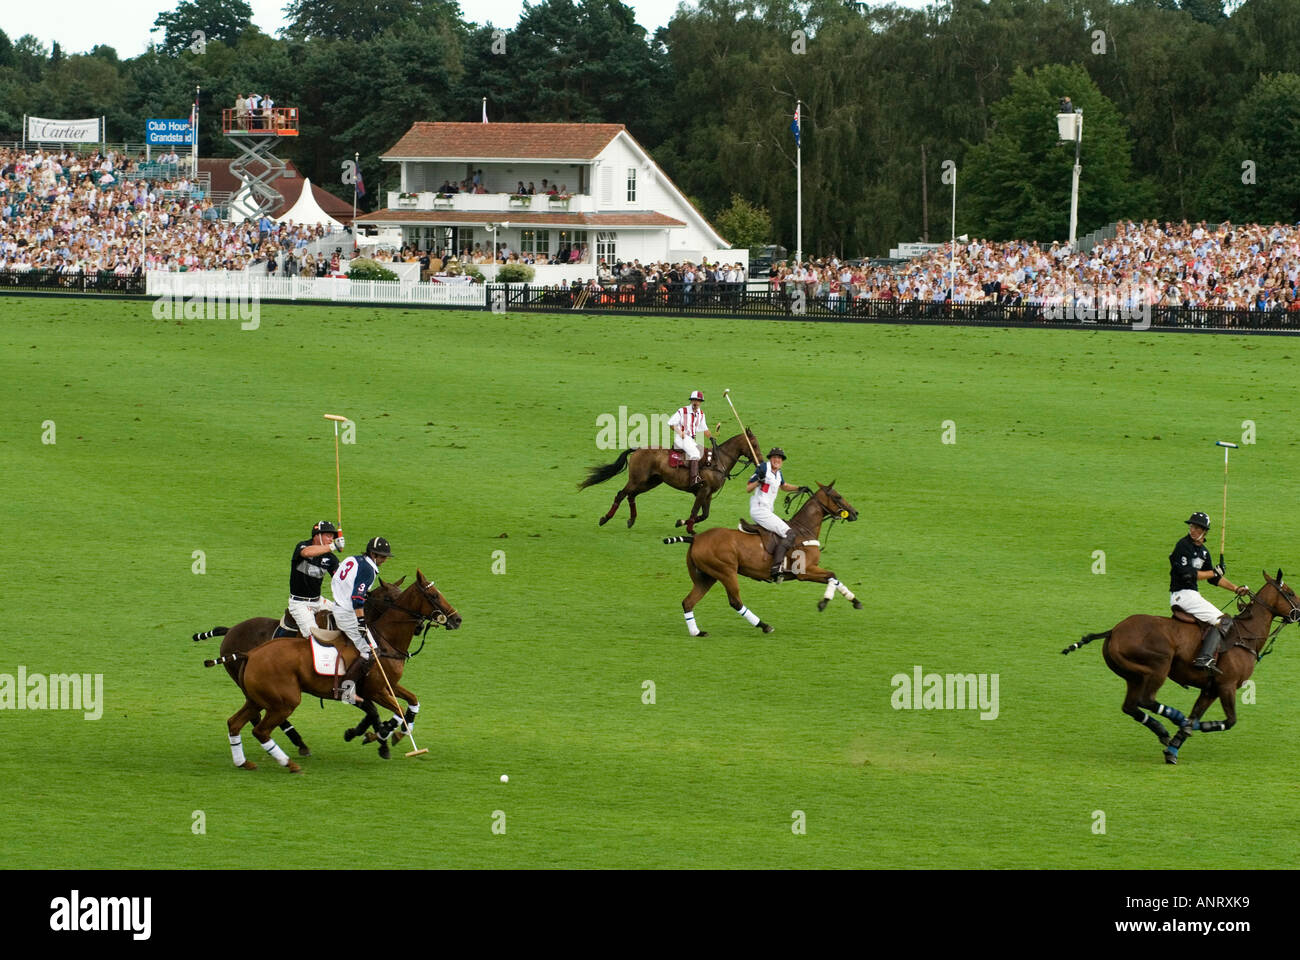 Polo Cartier International Polo at the "Guards Club" Smiths Lawn Windsor Great park Egham Surrey England   The club house 2000s 2006 Stock Photo